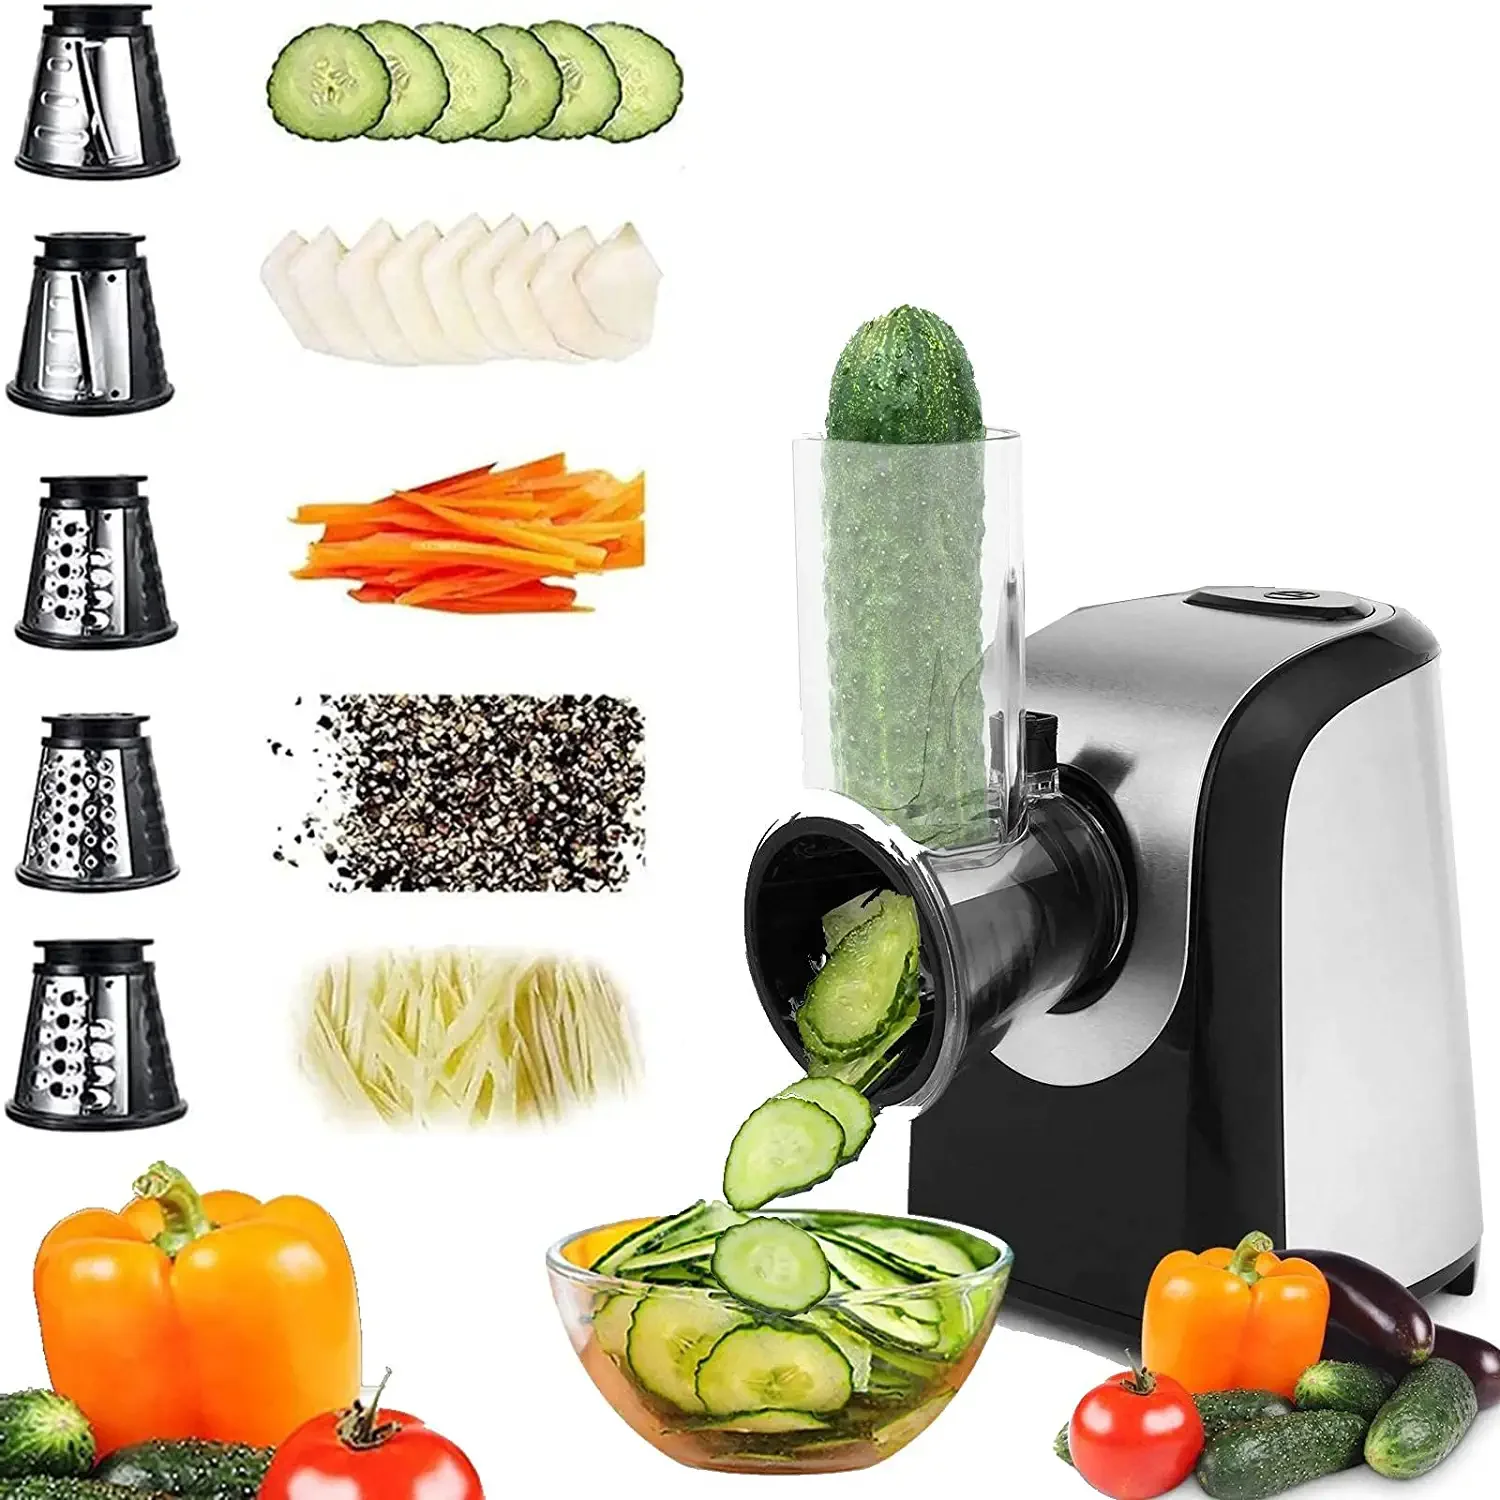 https://ae01.alicdn.com/kf/Sc5fa3fb6a560432986da6af2d145e88fH/Electric-Cheese-Grater-Professional-Salad-Shooter-Electric-Slicer-Shredder-150W-Electric-Gratersr-Chopper-Shooter-with-One.png